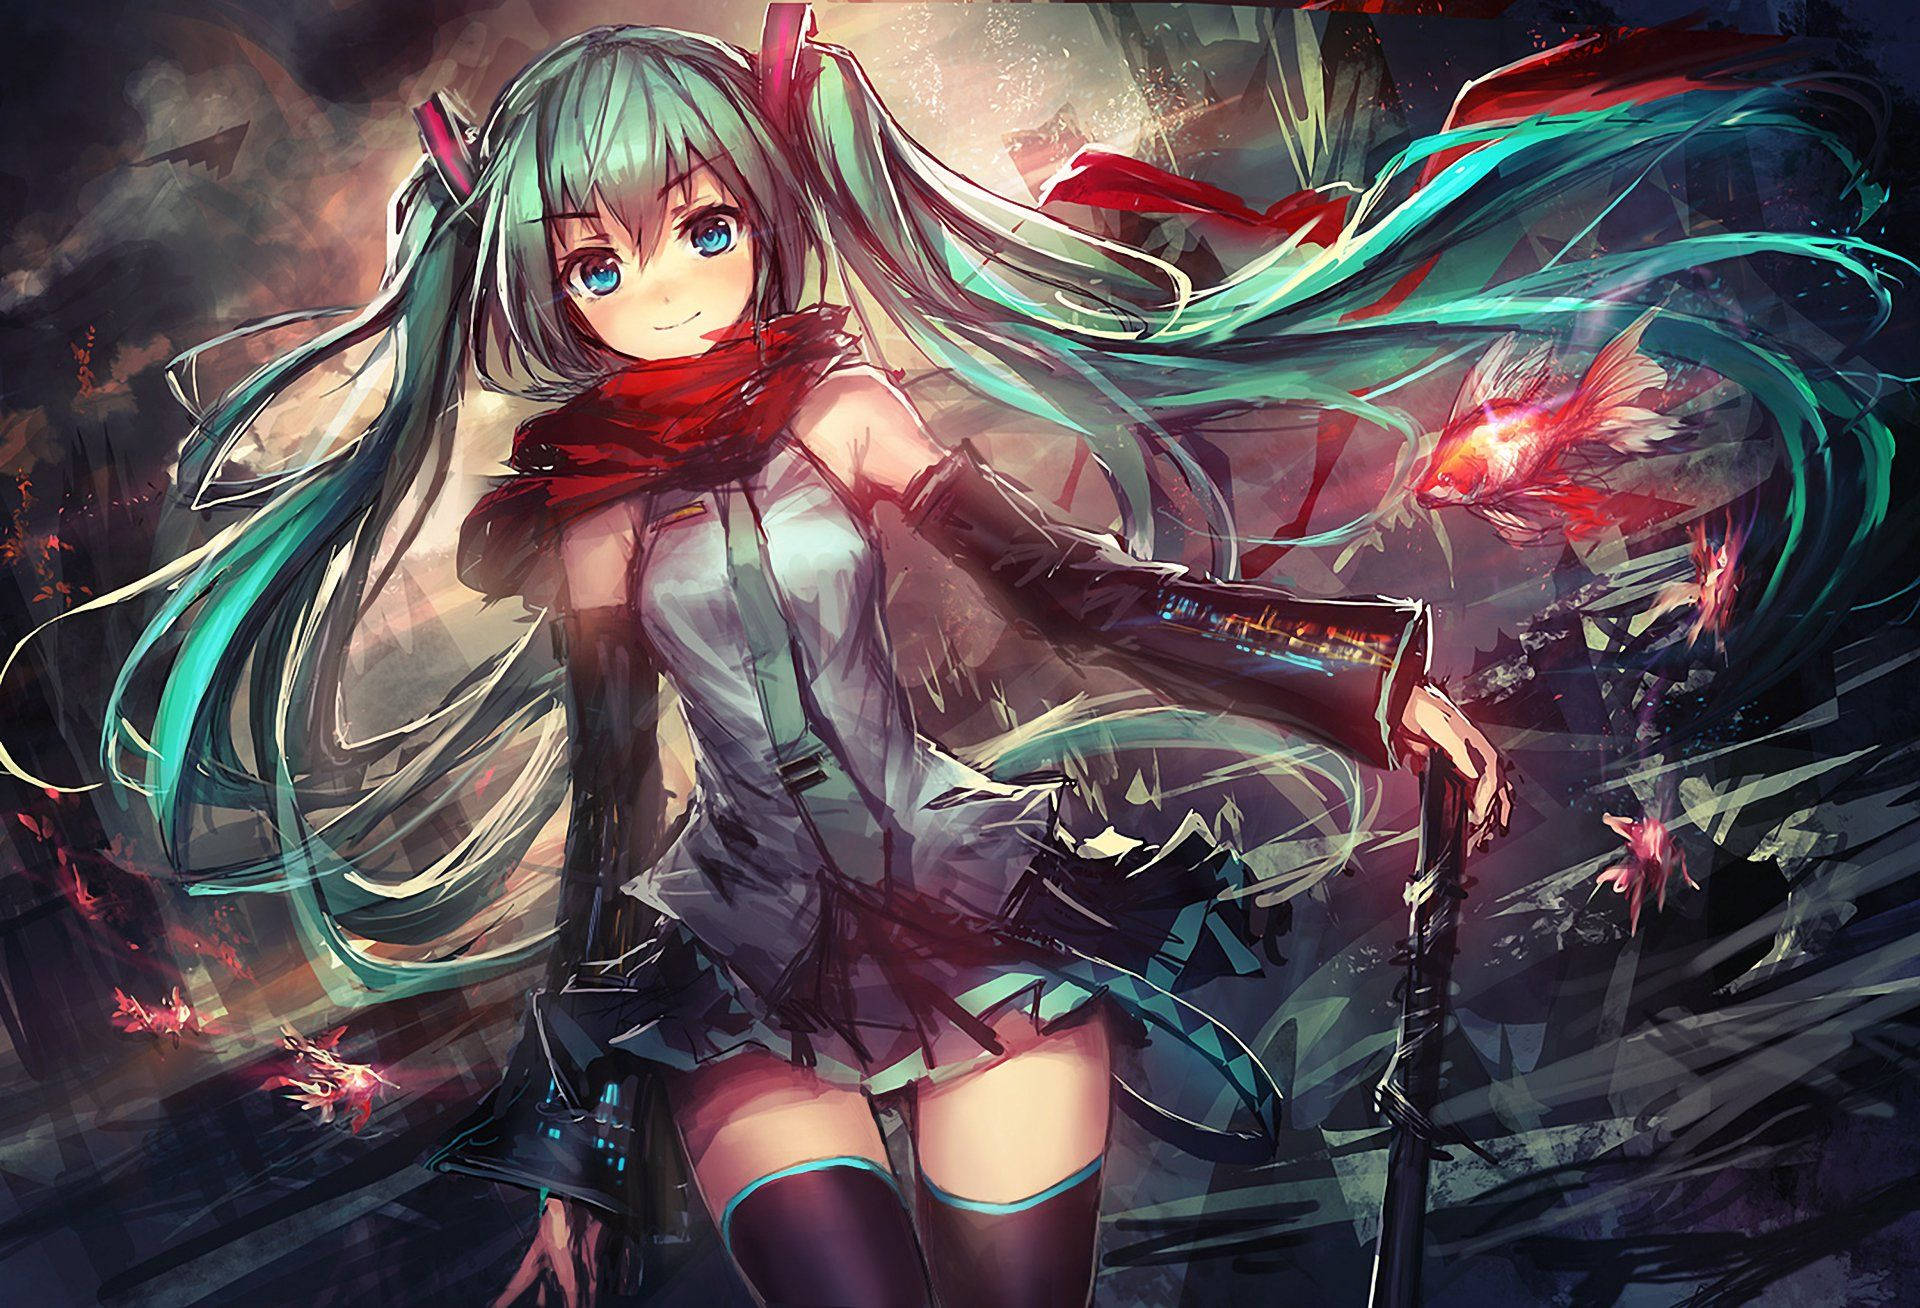 Anime girl and vocaloid Hatsune Miku with long blue ponytailed hair wallpaper